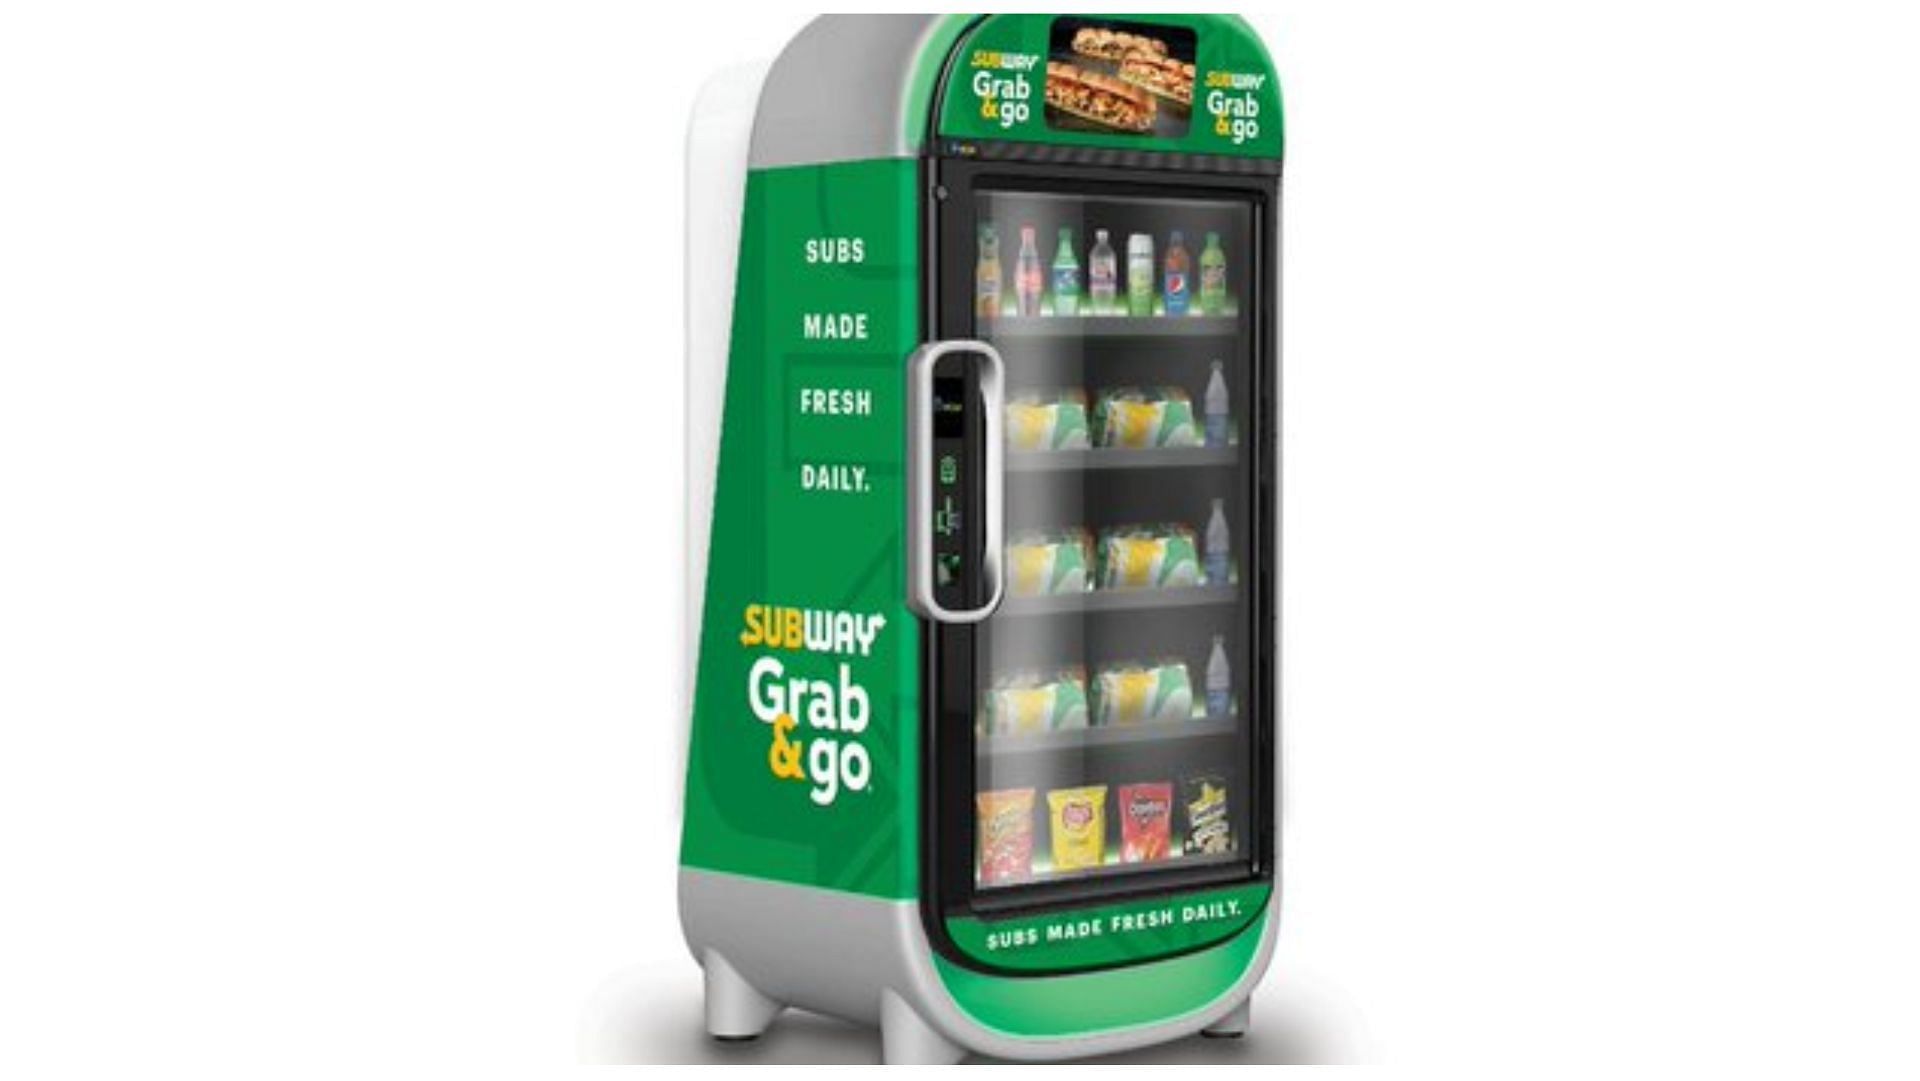 Subway will now sell sandwiches in Subway vending machines (Image via Subway)